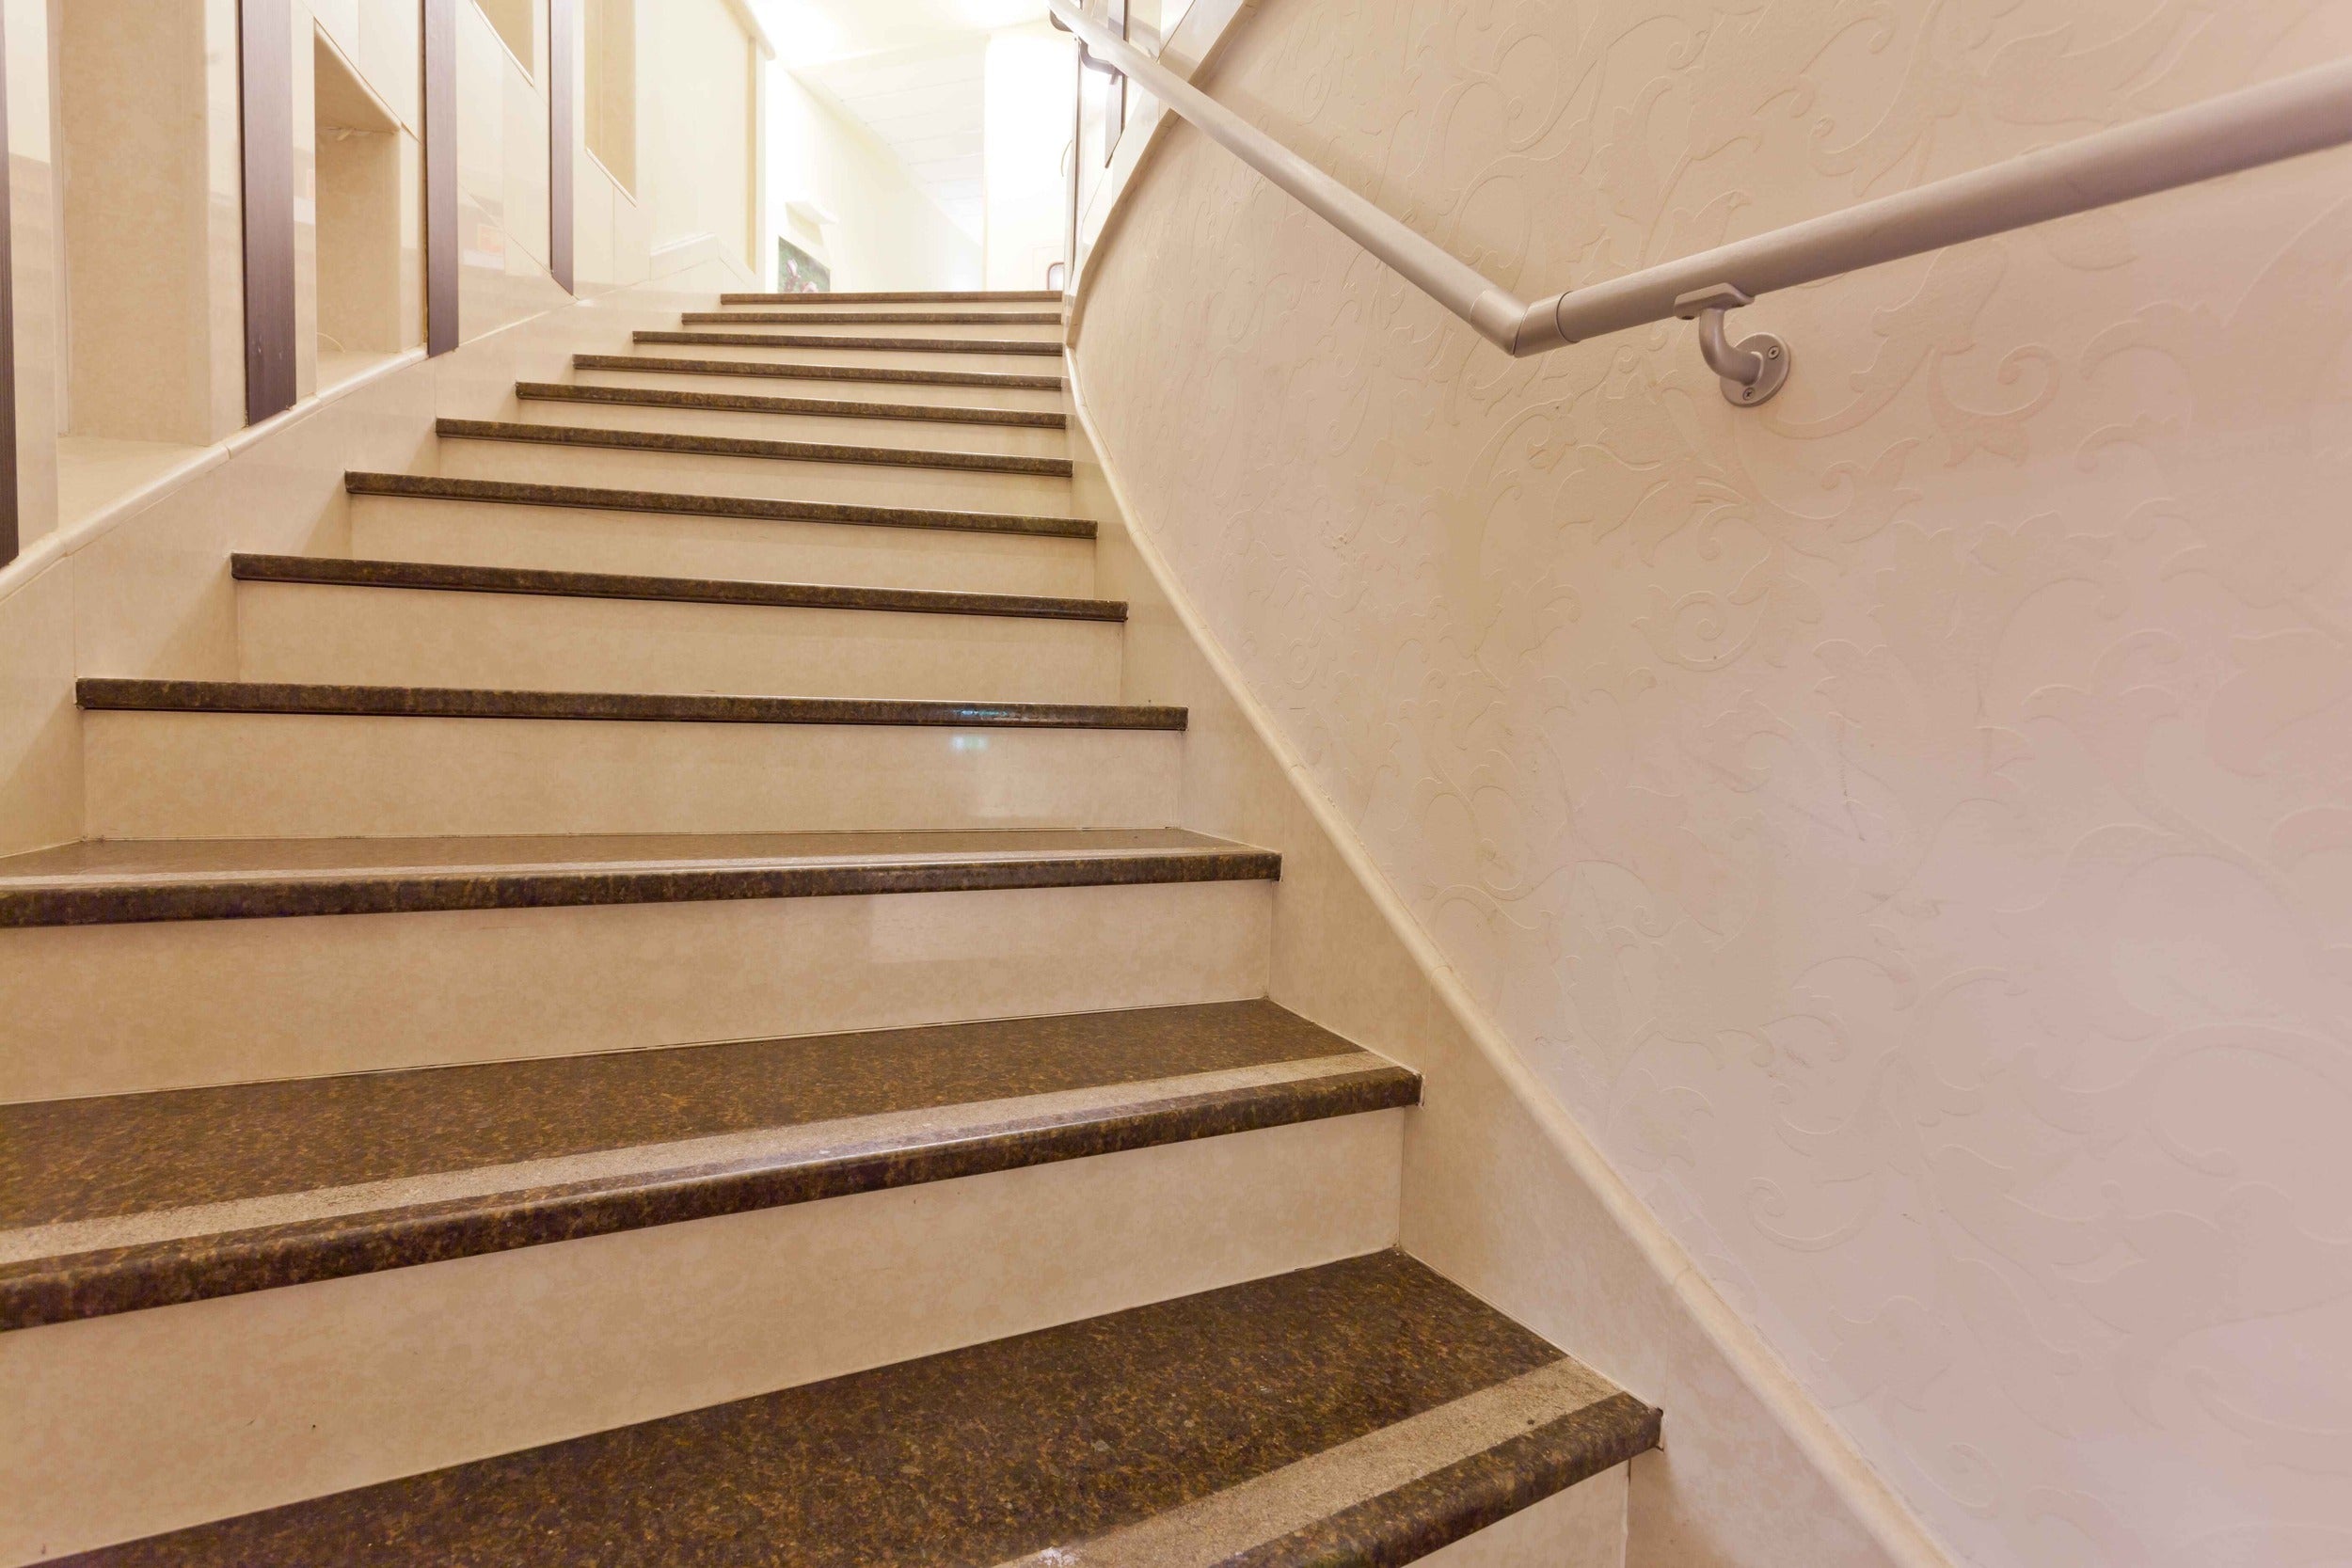 The Significance of Railing Systems for Safety and Aesthetics